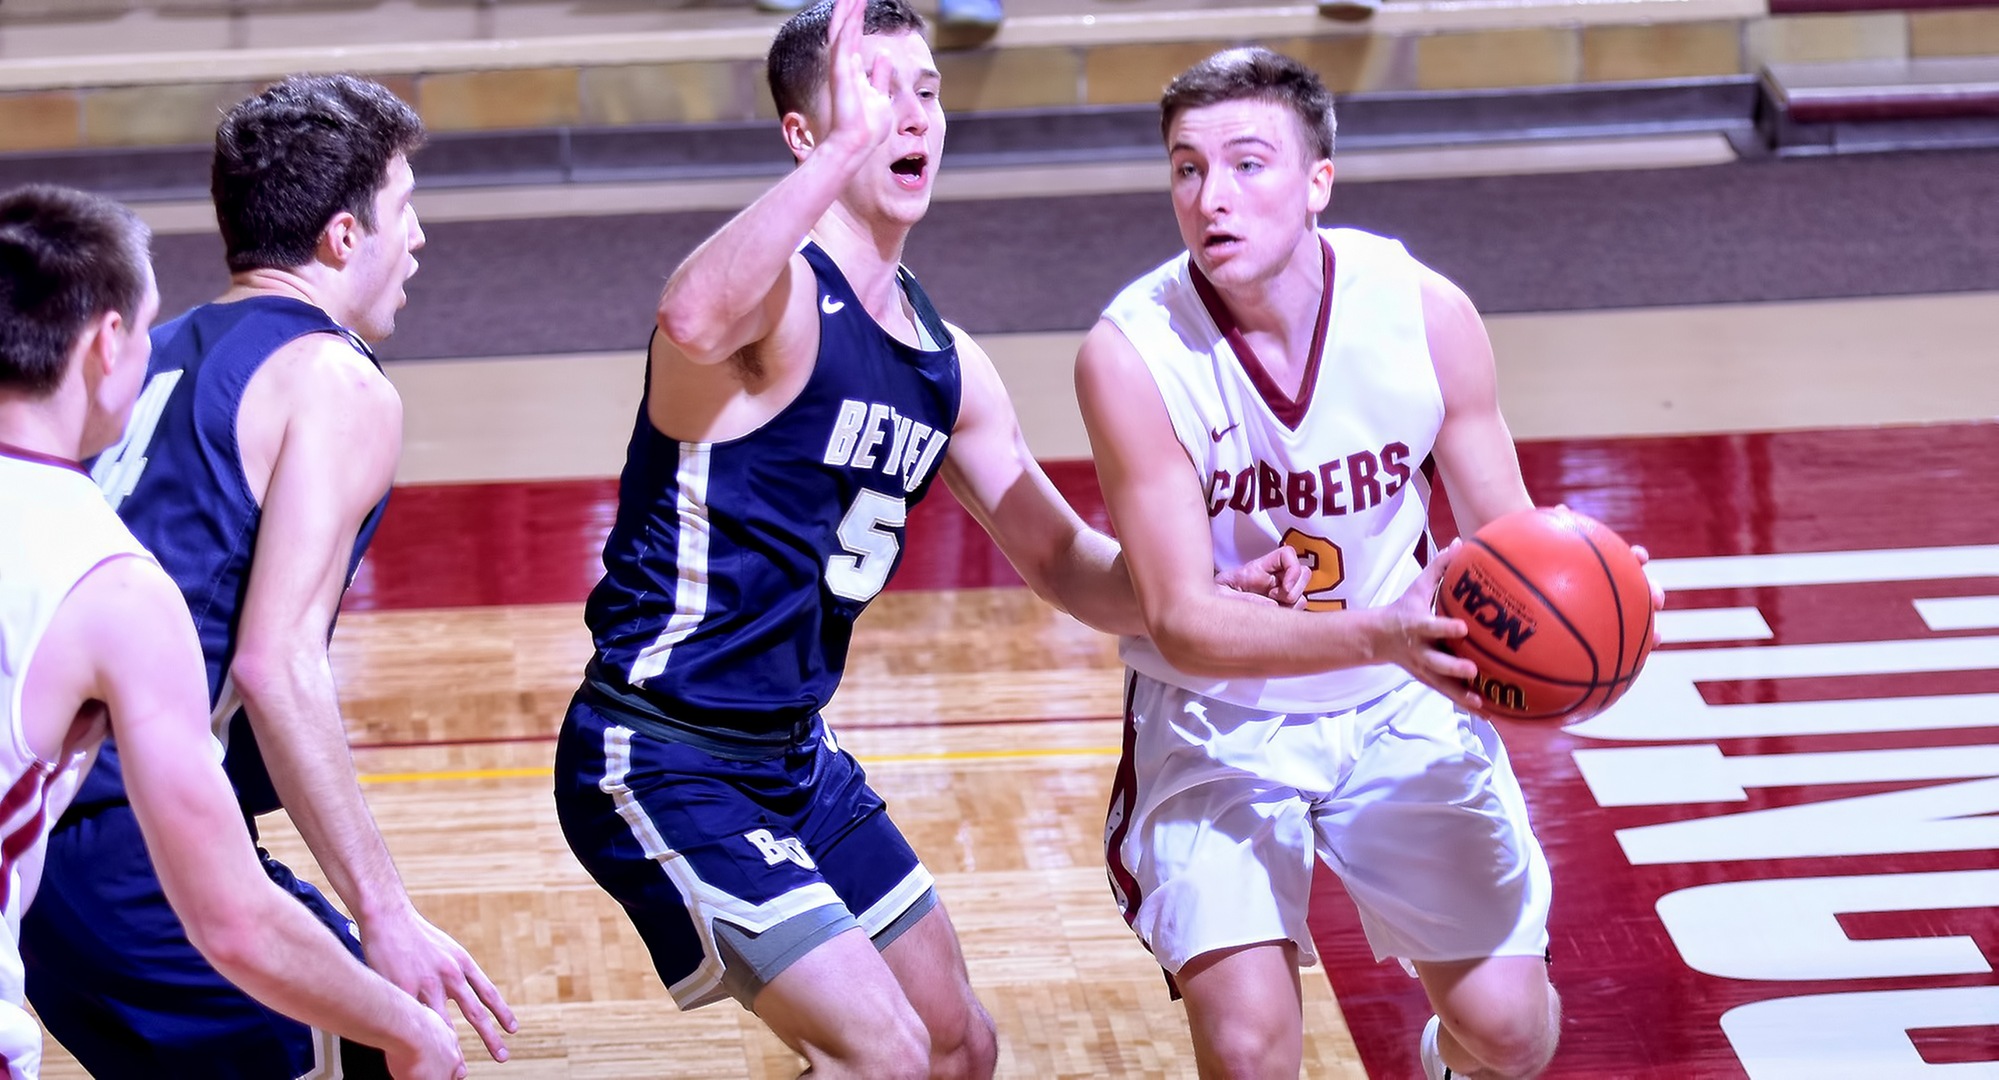 Junior guard Bryden Urie put up a career-high 27 points in the Cobbers' game at Bethel.